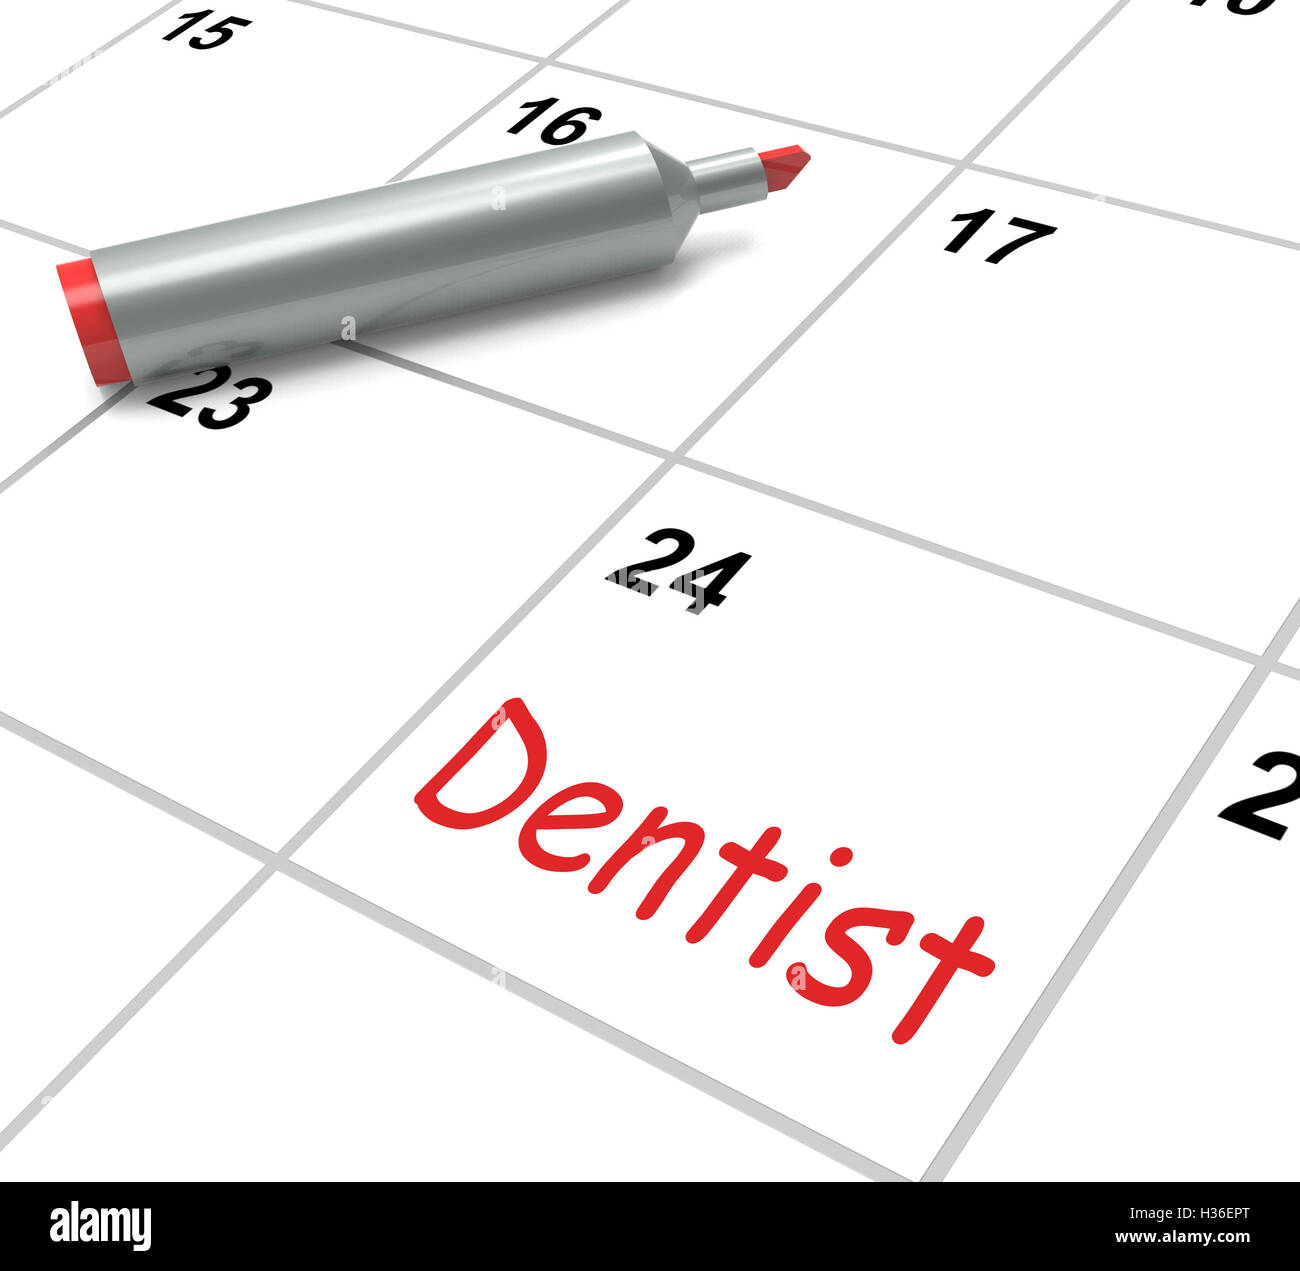 Dentist Calendar Shows Oral Health And Dental Appointment Stock Photo